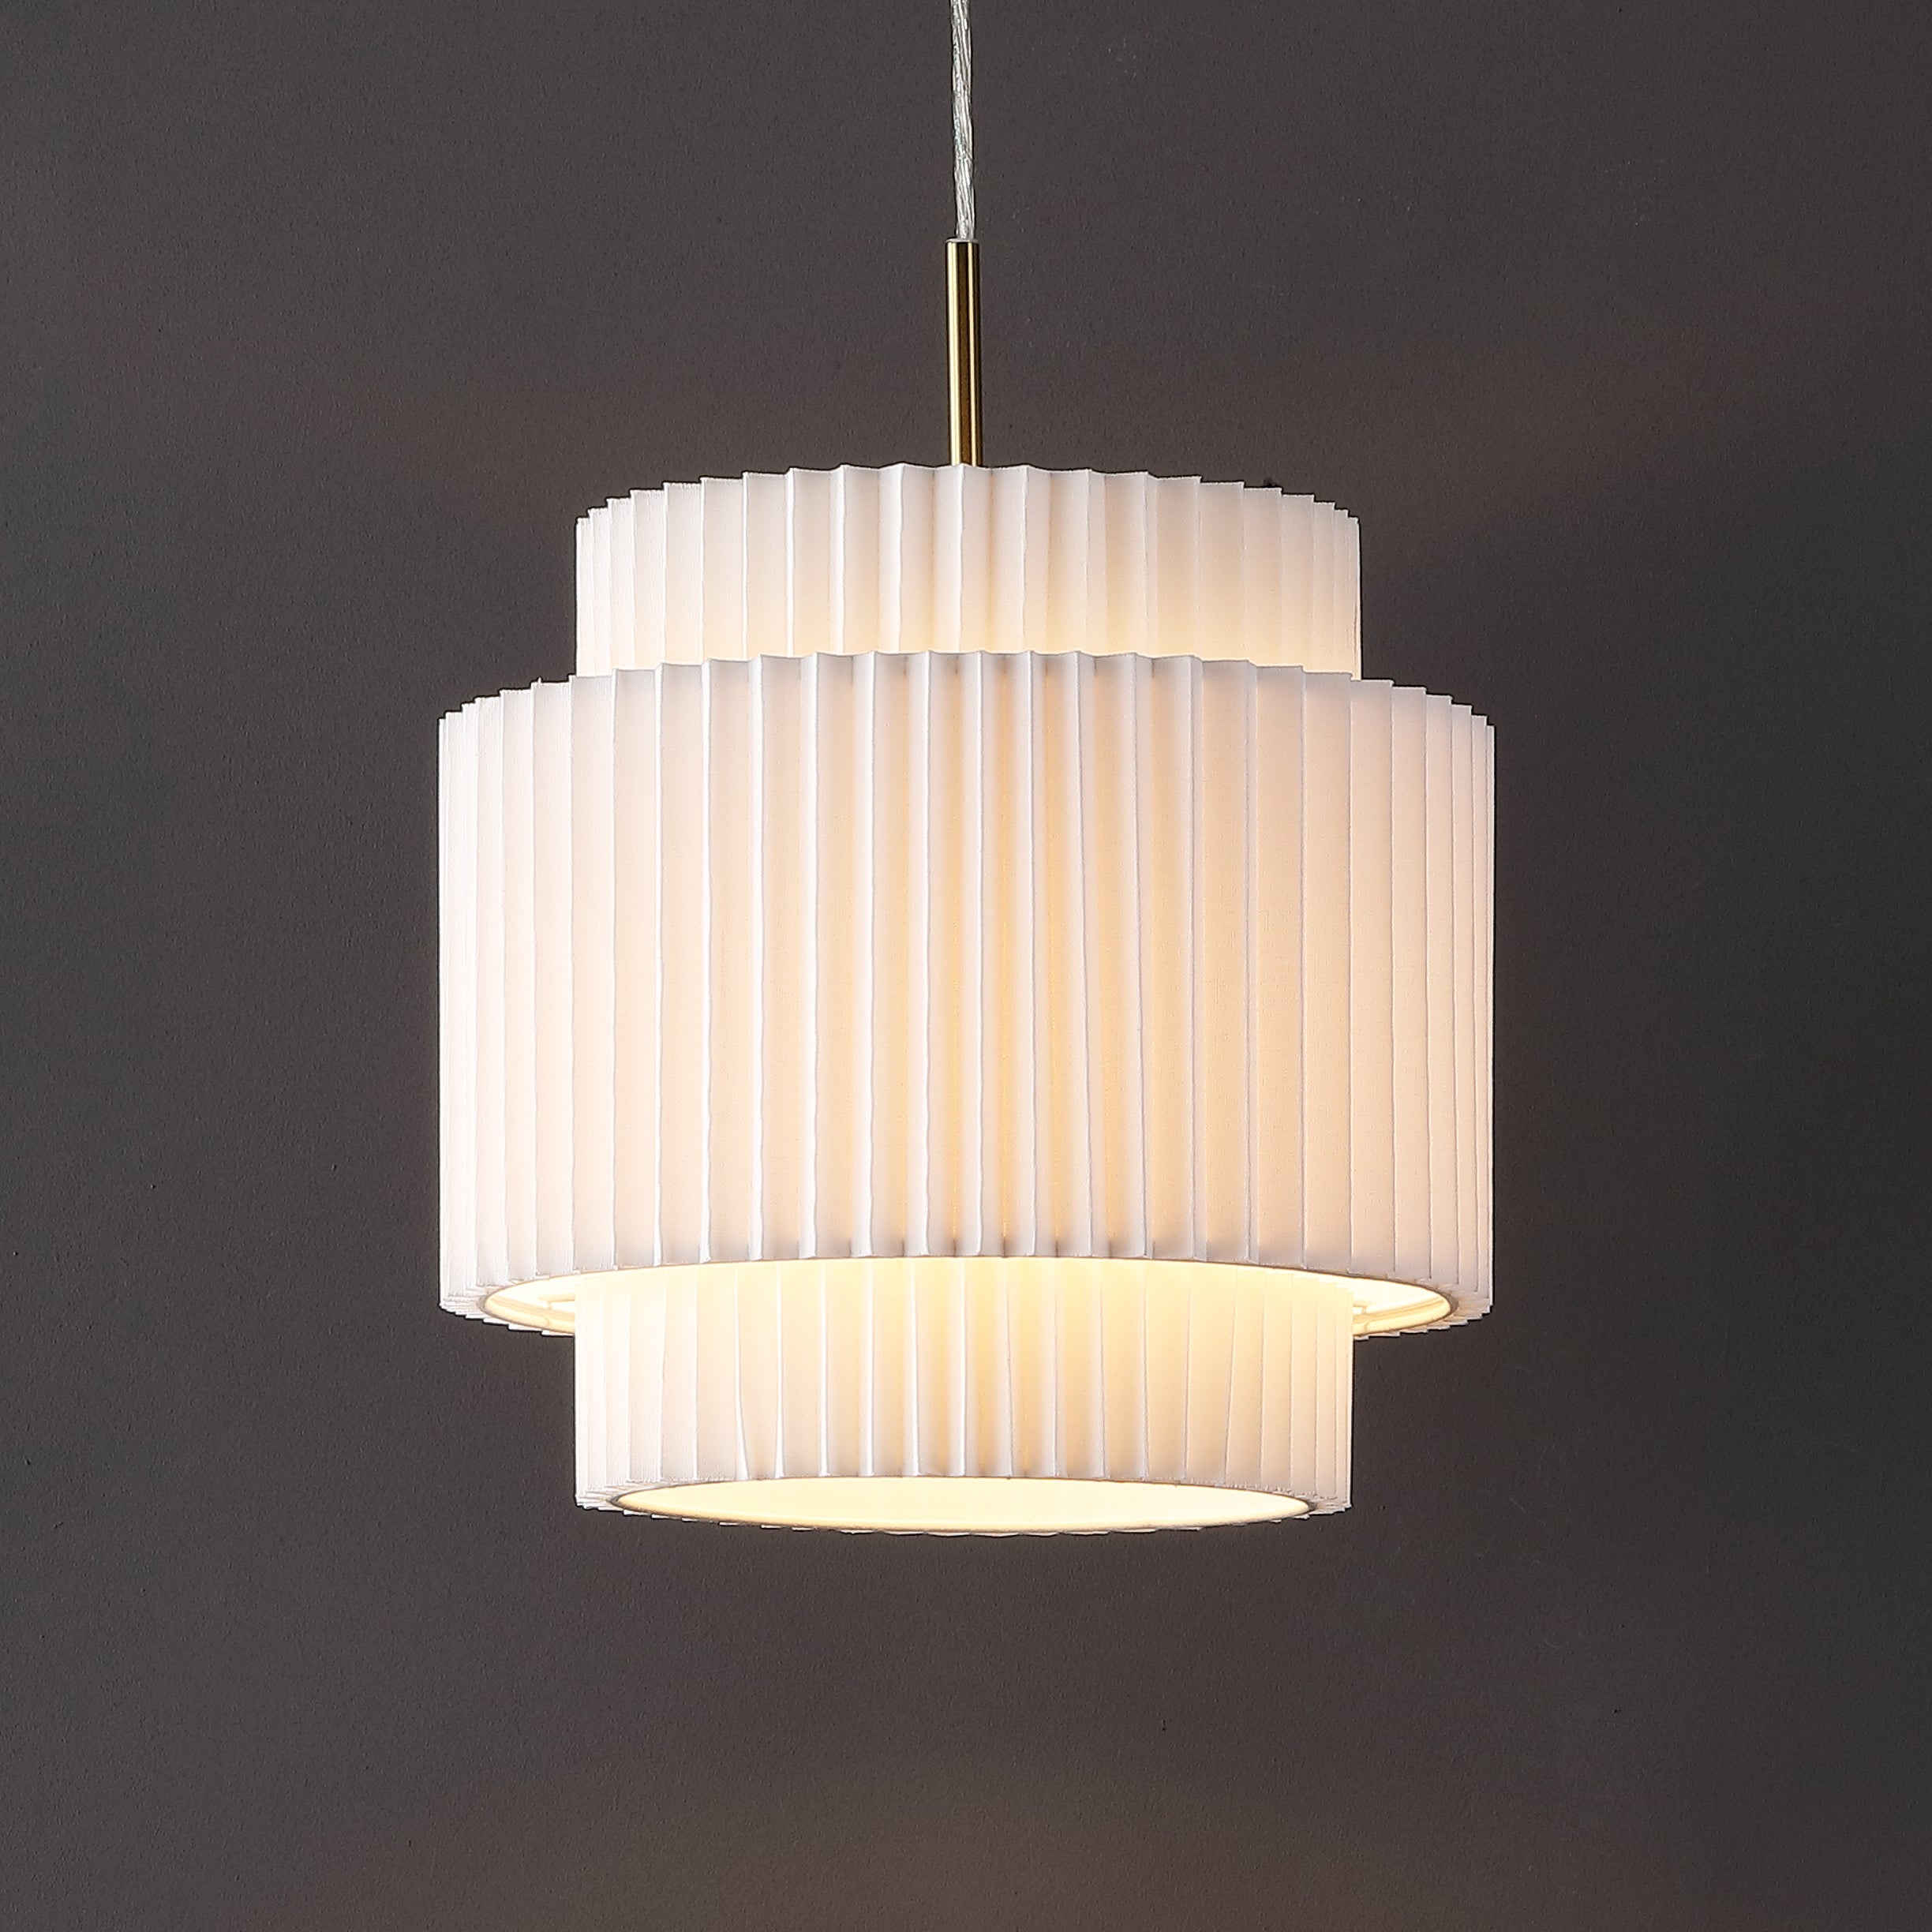 Shop Jonathan Y Boden 14.5" 1-light Vintage Mid-century Iron Led Pendant With Pleated Shade, Brass Gold/white